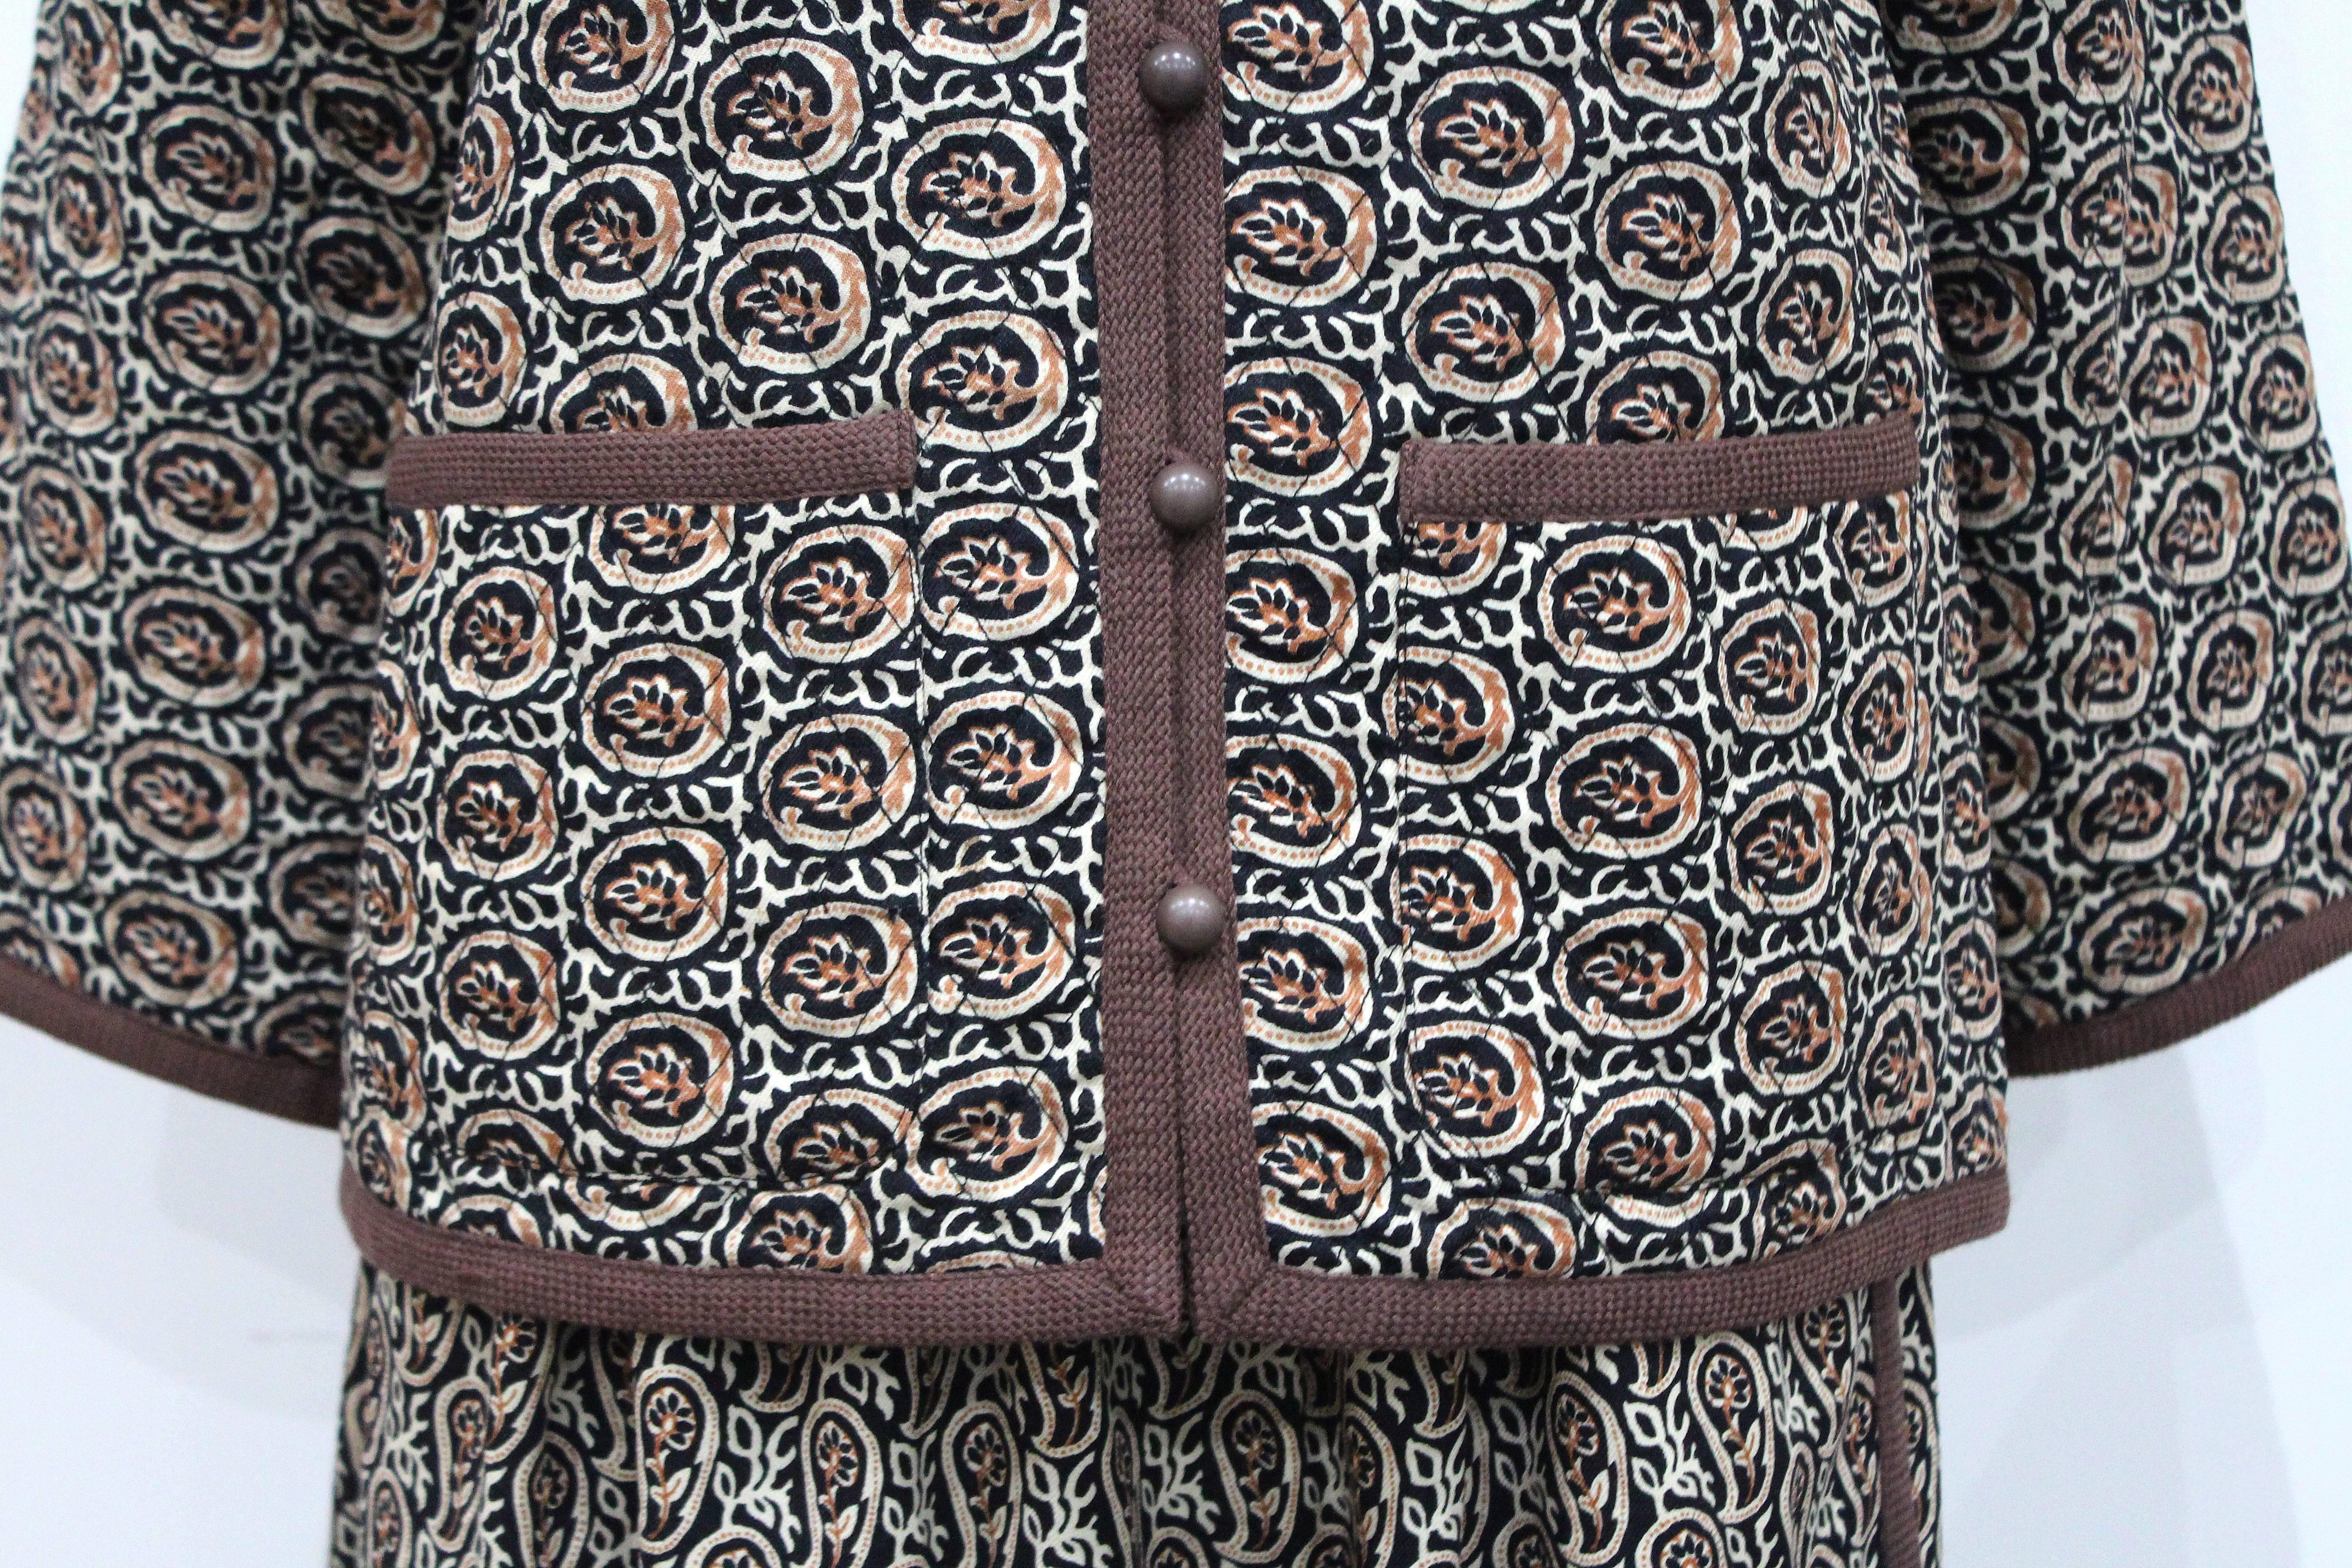 A paisley skirt suit by Yves Saint Laurent from the 1970s Russian collection. The skirt is in a wrap style and the jacket is quilted. 

Fr 34